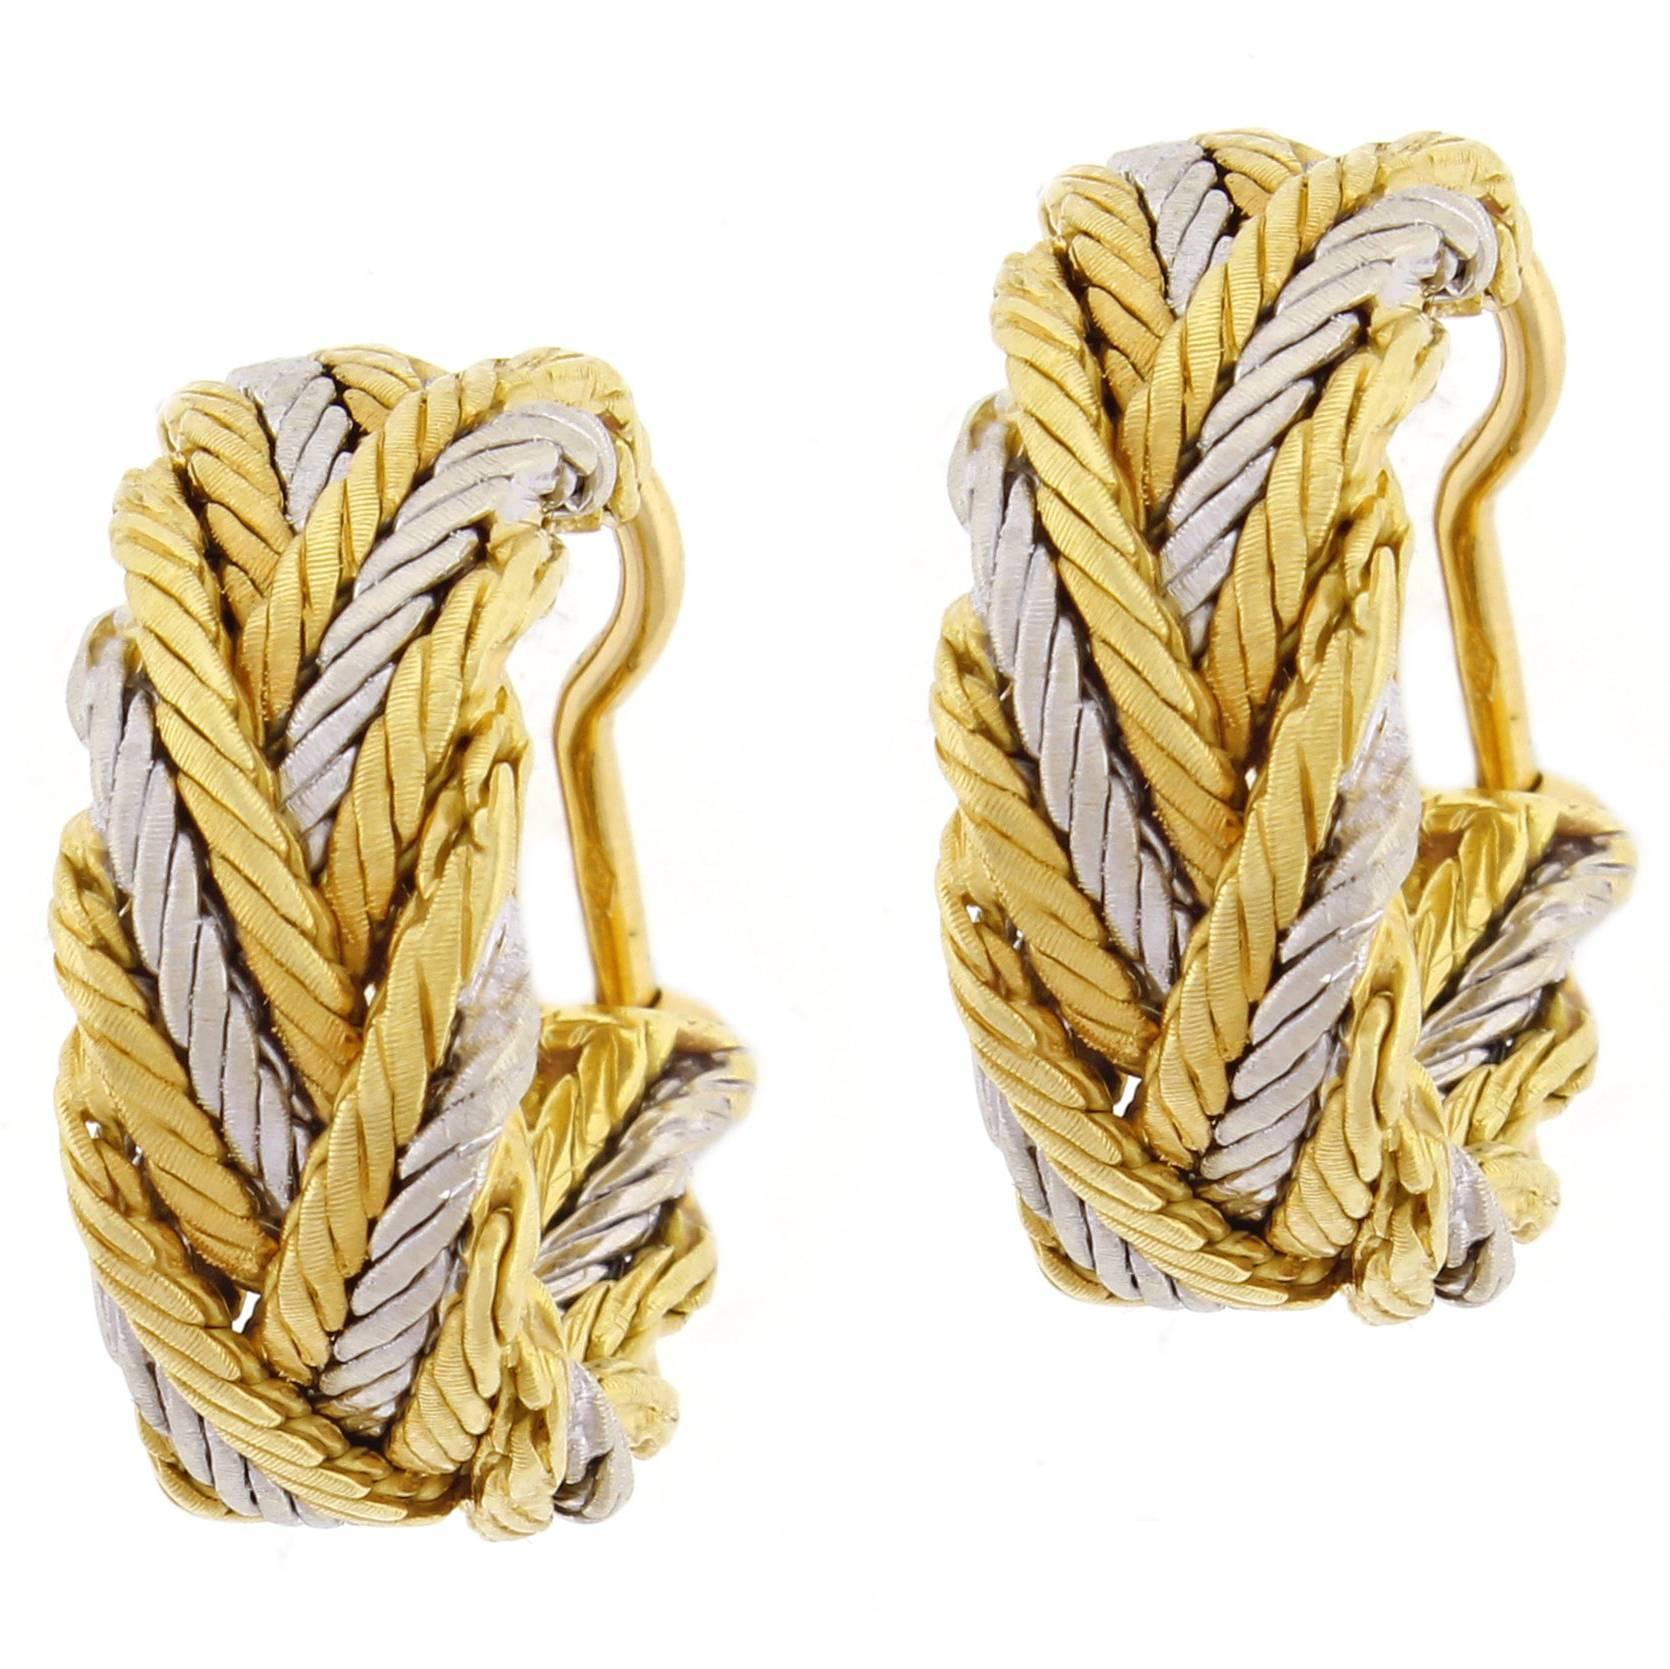 Buccellati Braided White and Yellow Gold Hoop Earrings